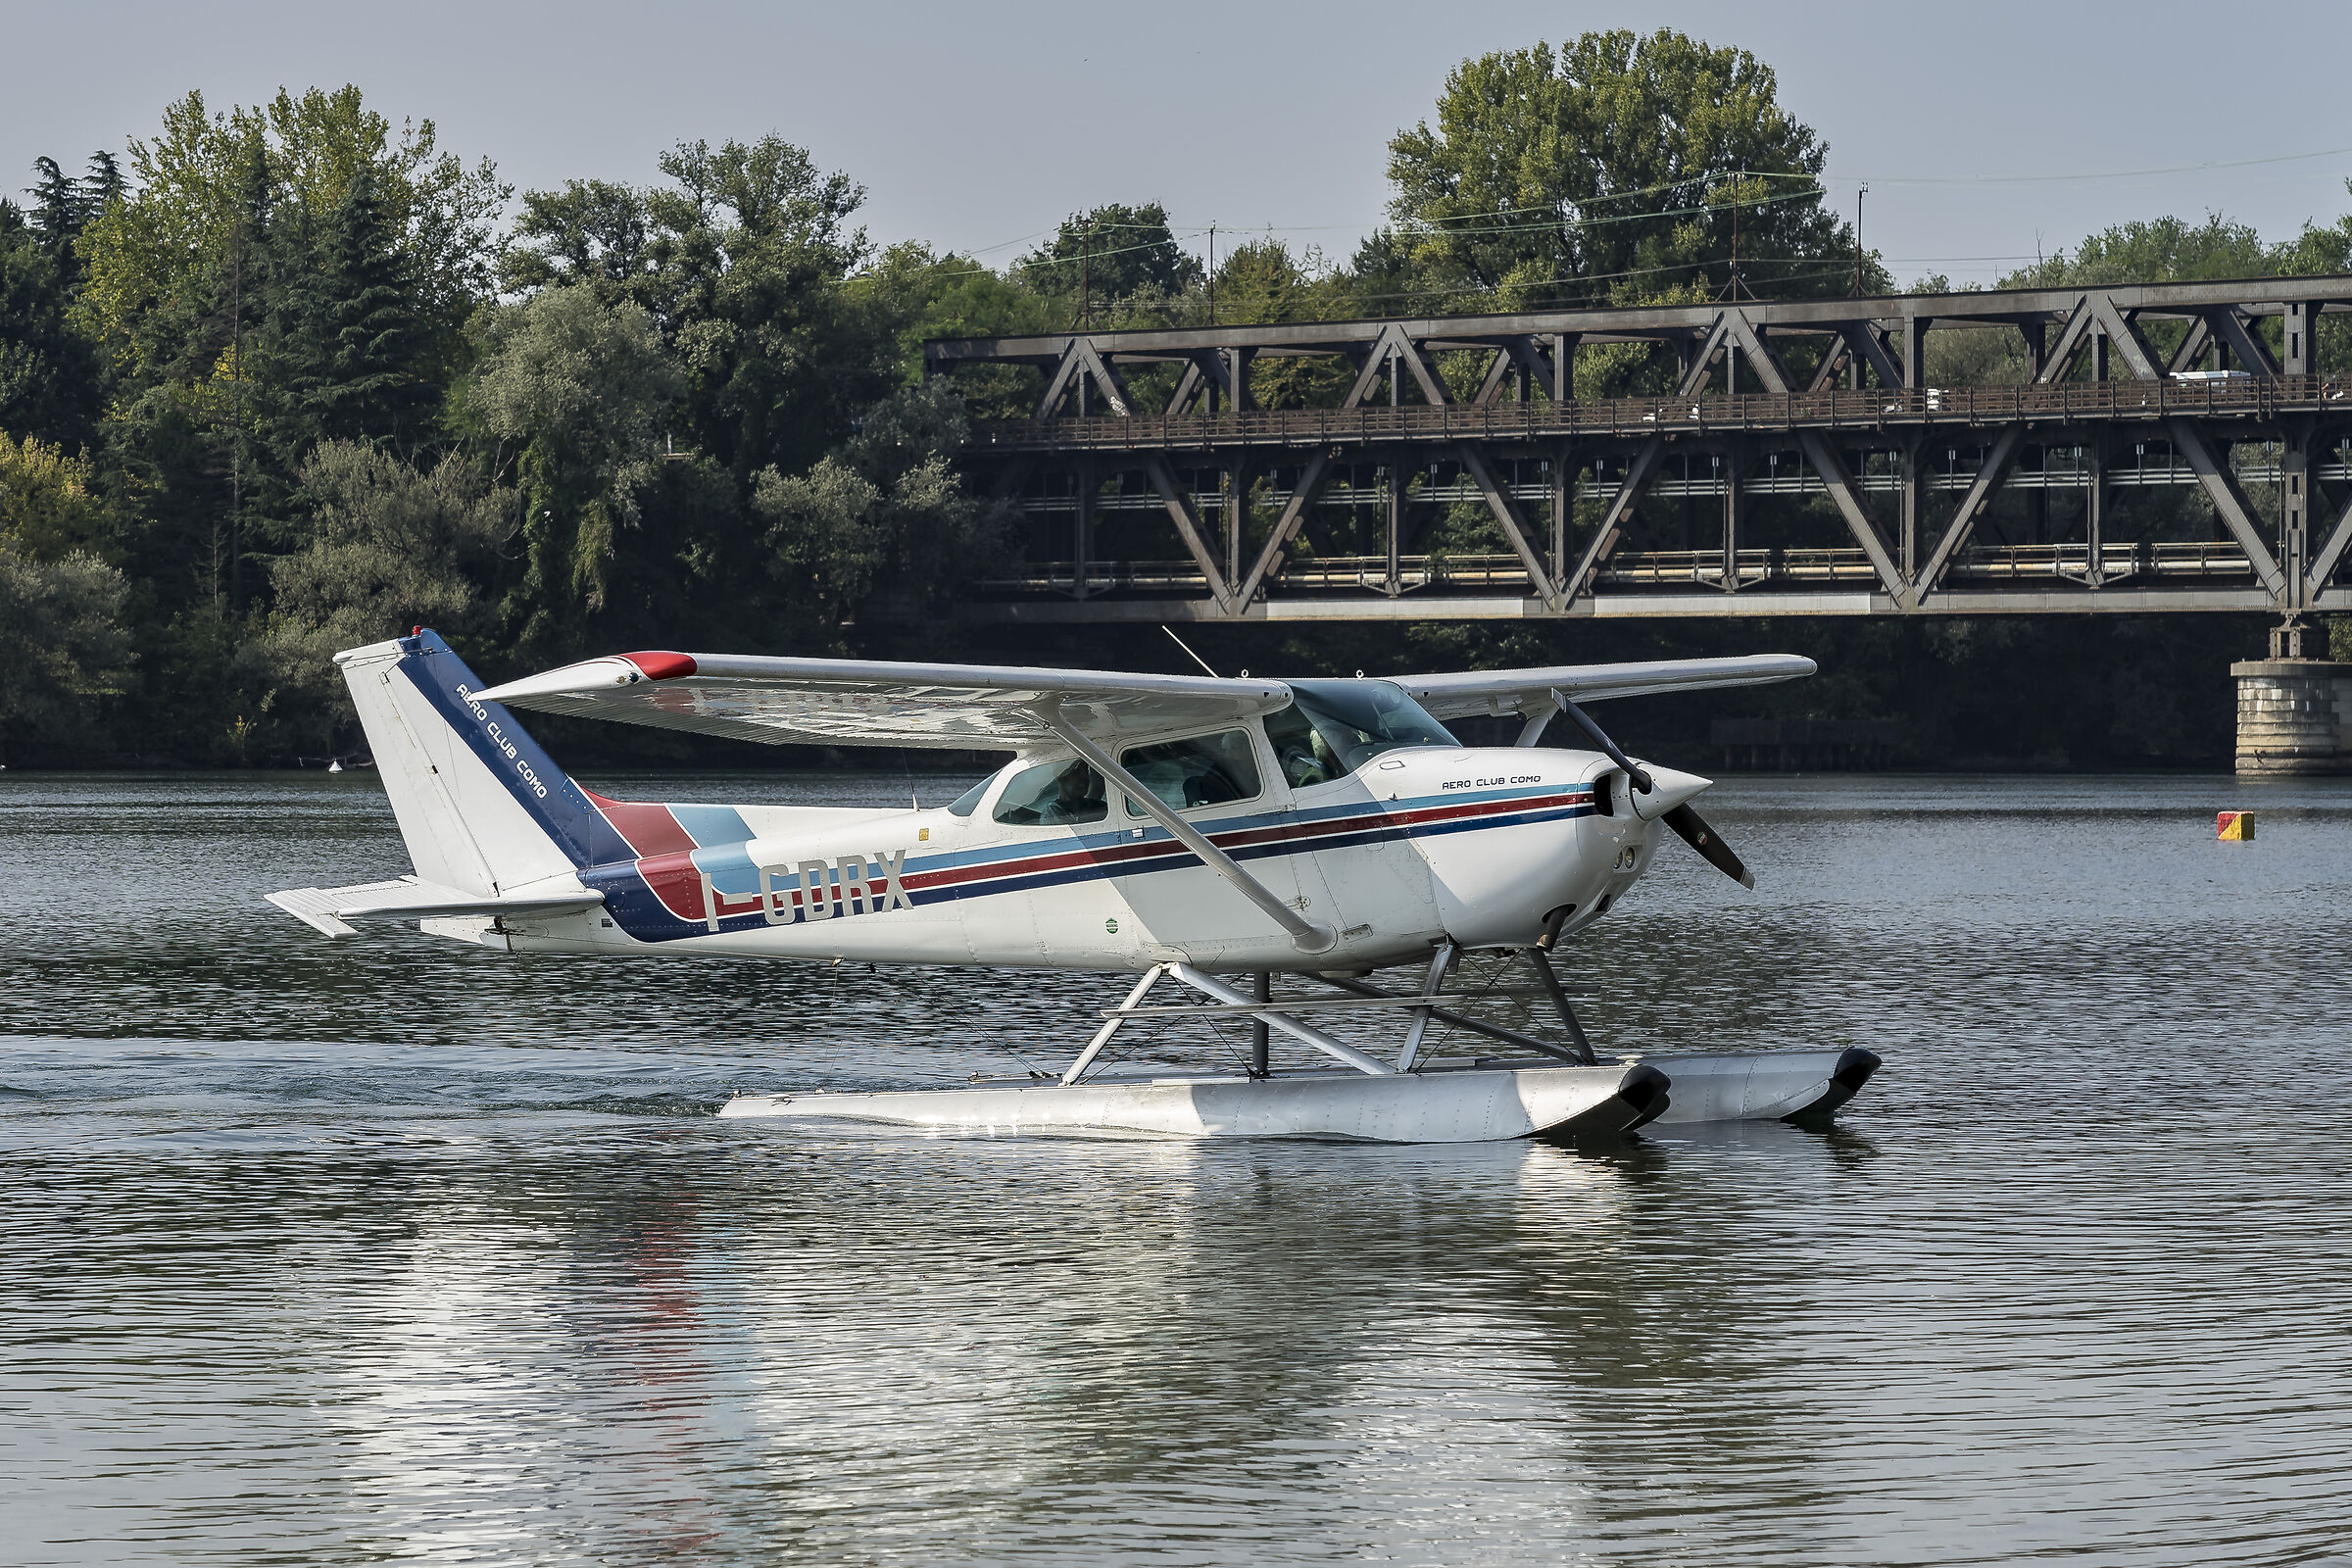 Docking of the Cessna 172 "Skyhawk" I-GDRX at the wharf - 2...